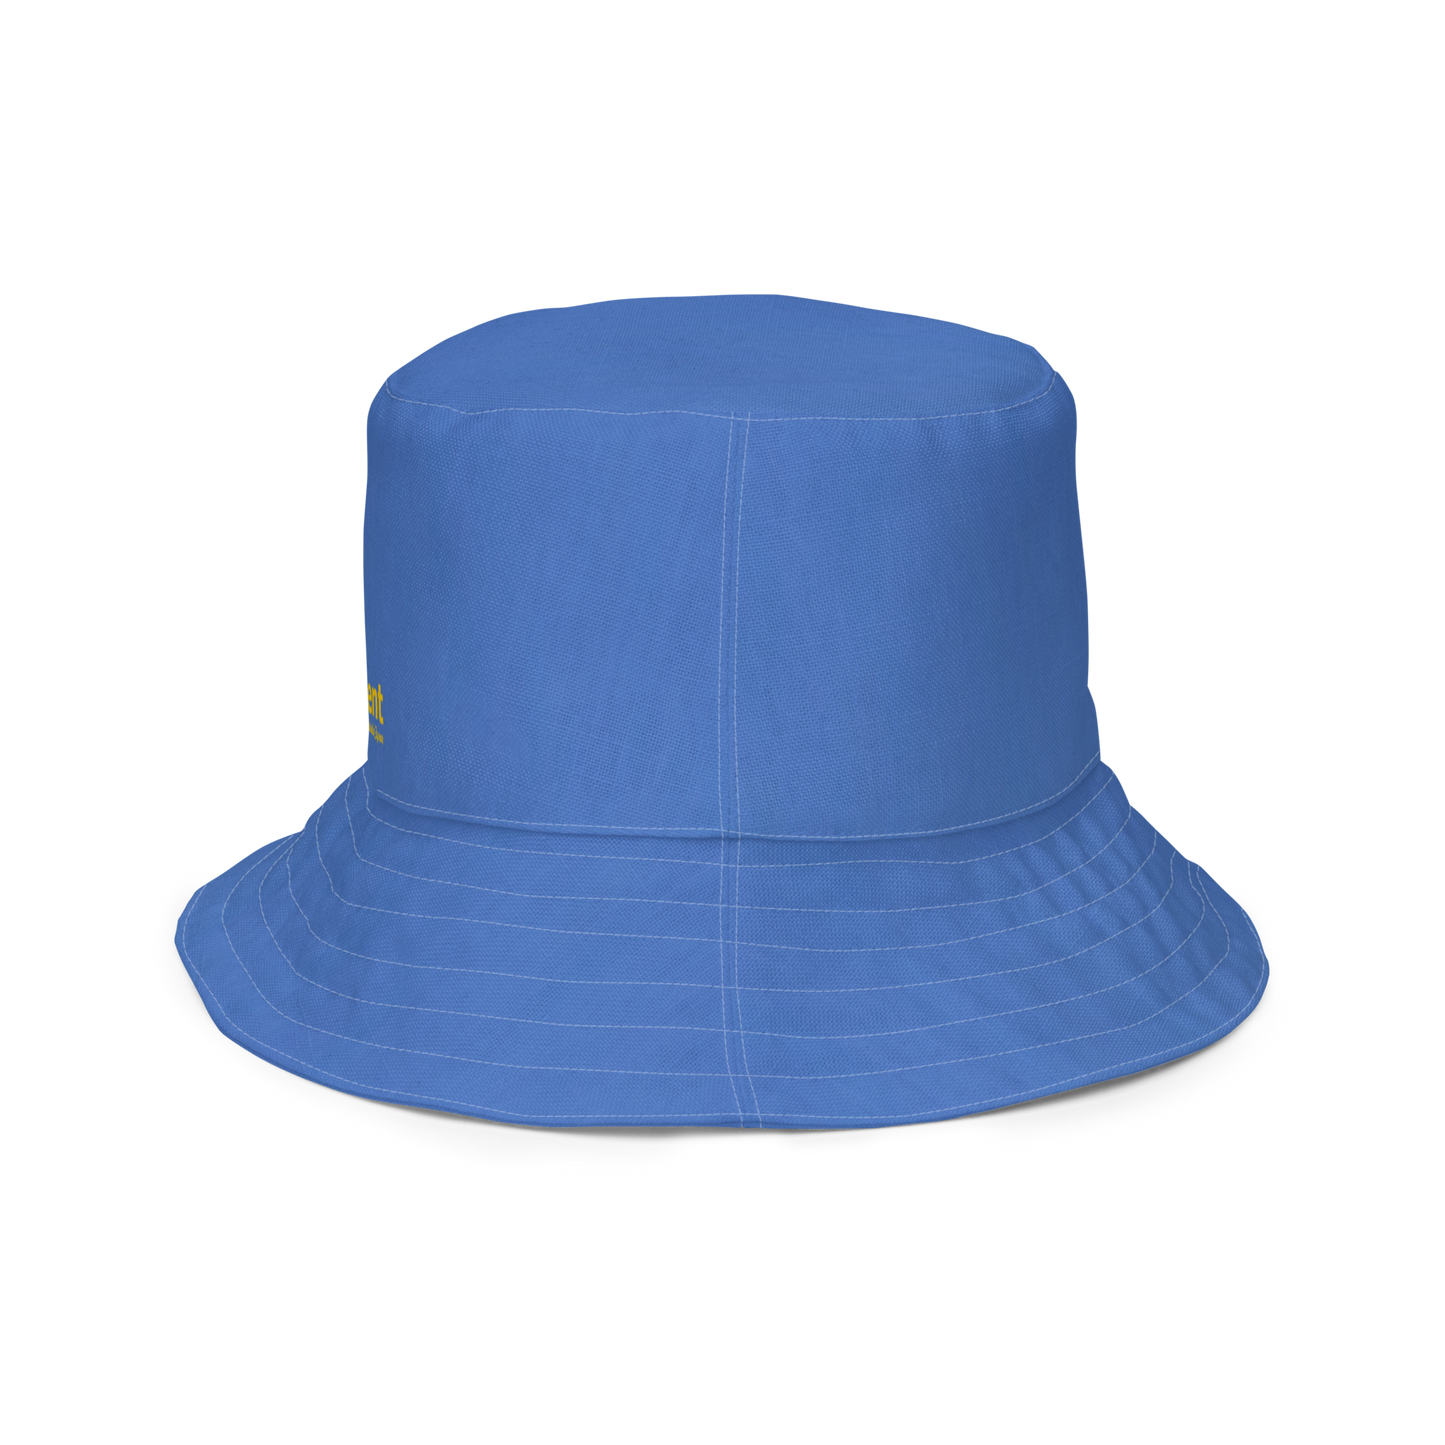 The FLOWER LOVE Collection - "Sunflower Sisters" Design Premium Reversible Bucket Hat - Blue Inside - Beach Hat, Gifts for Her